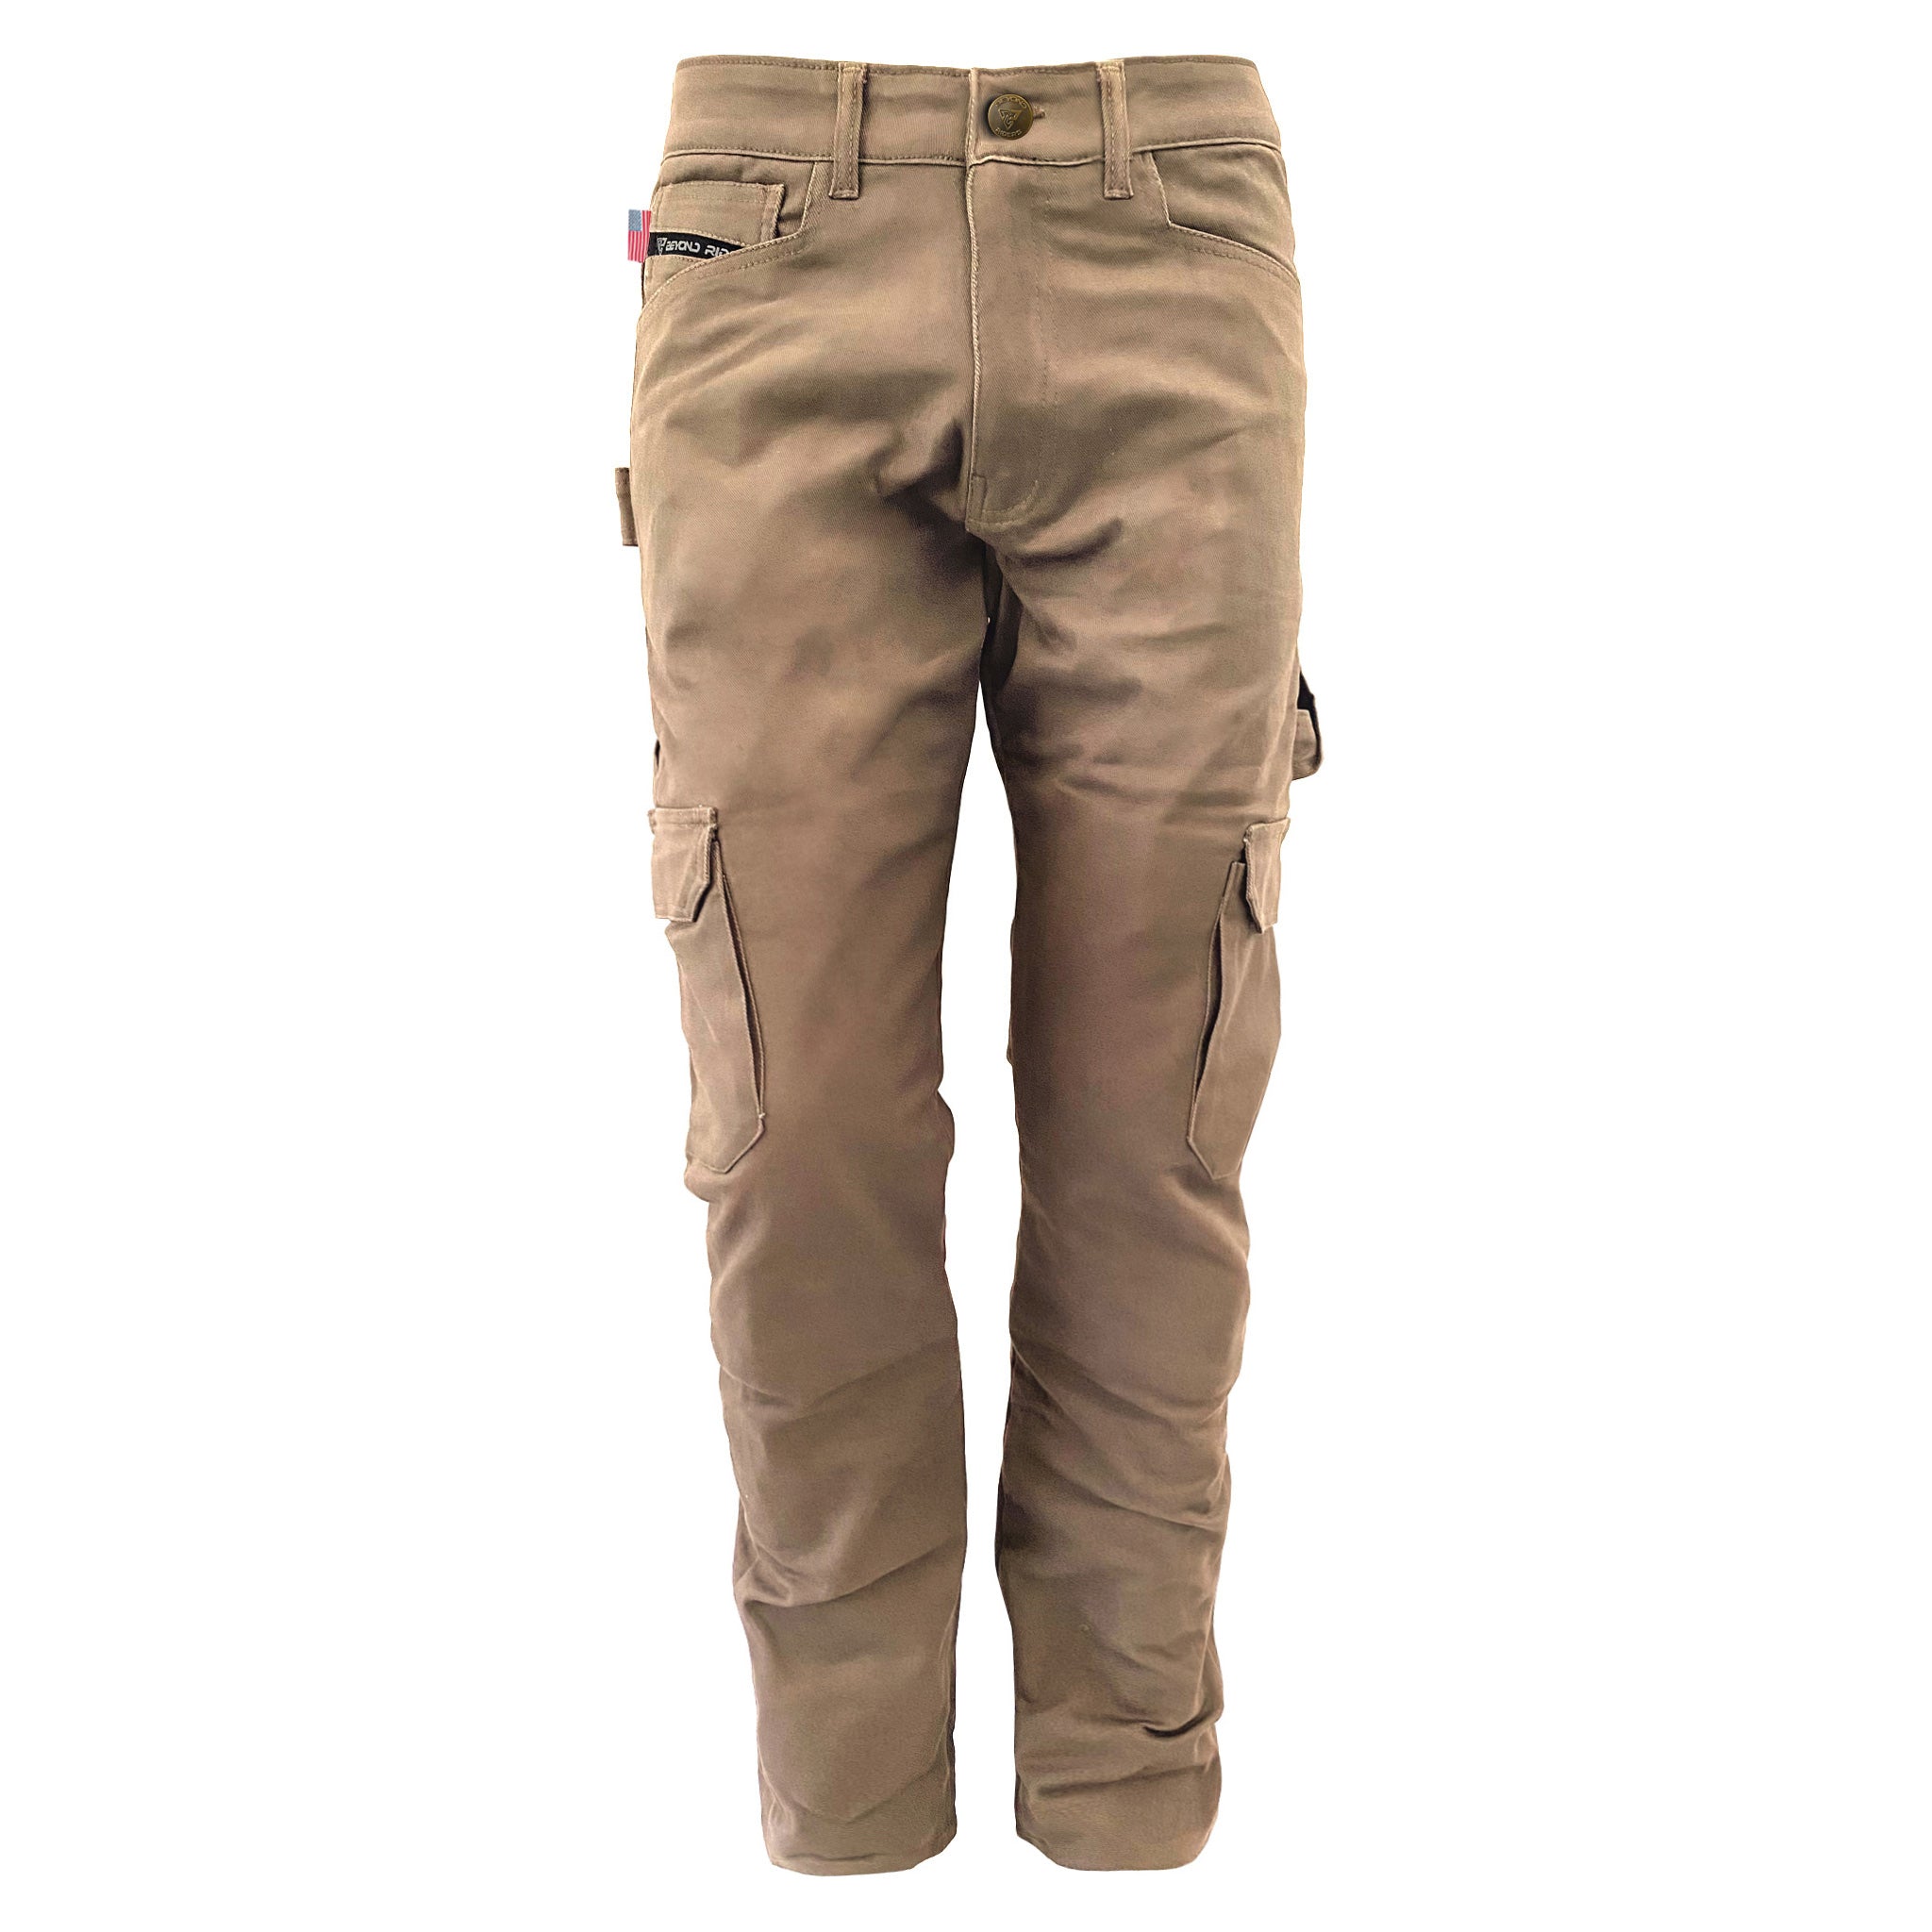 SALE Relaxed Fit Cargo Pants - Khaki Solid with Pads